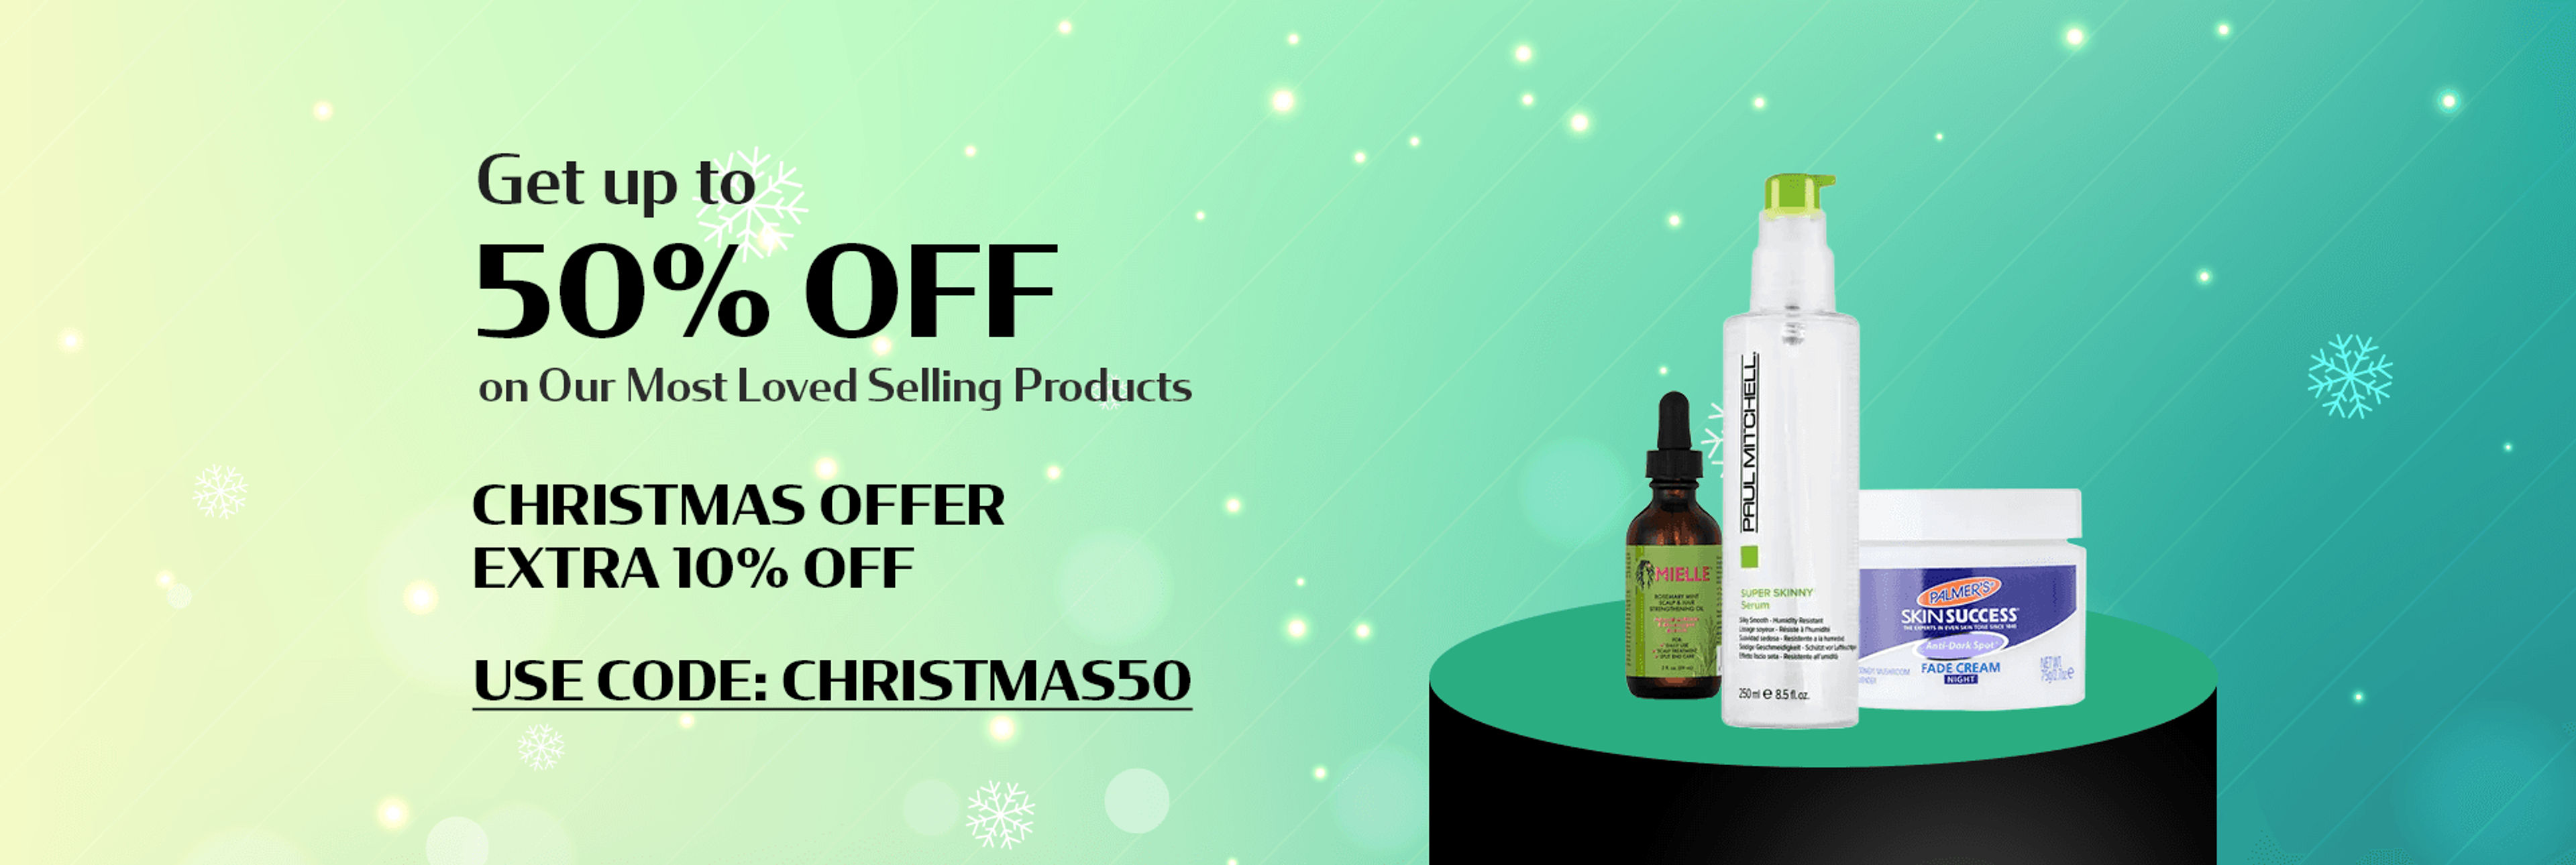 Get up to 50% off on our Most Loved Selling products + Extra 10% off on Christmas Offers